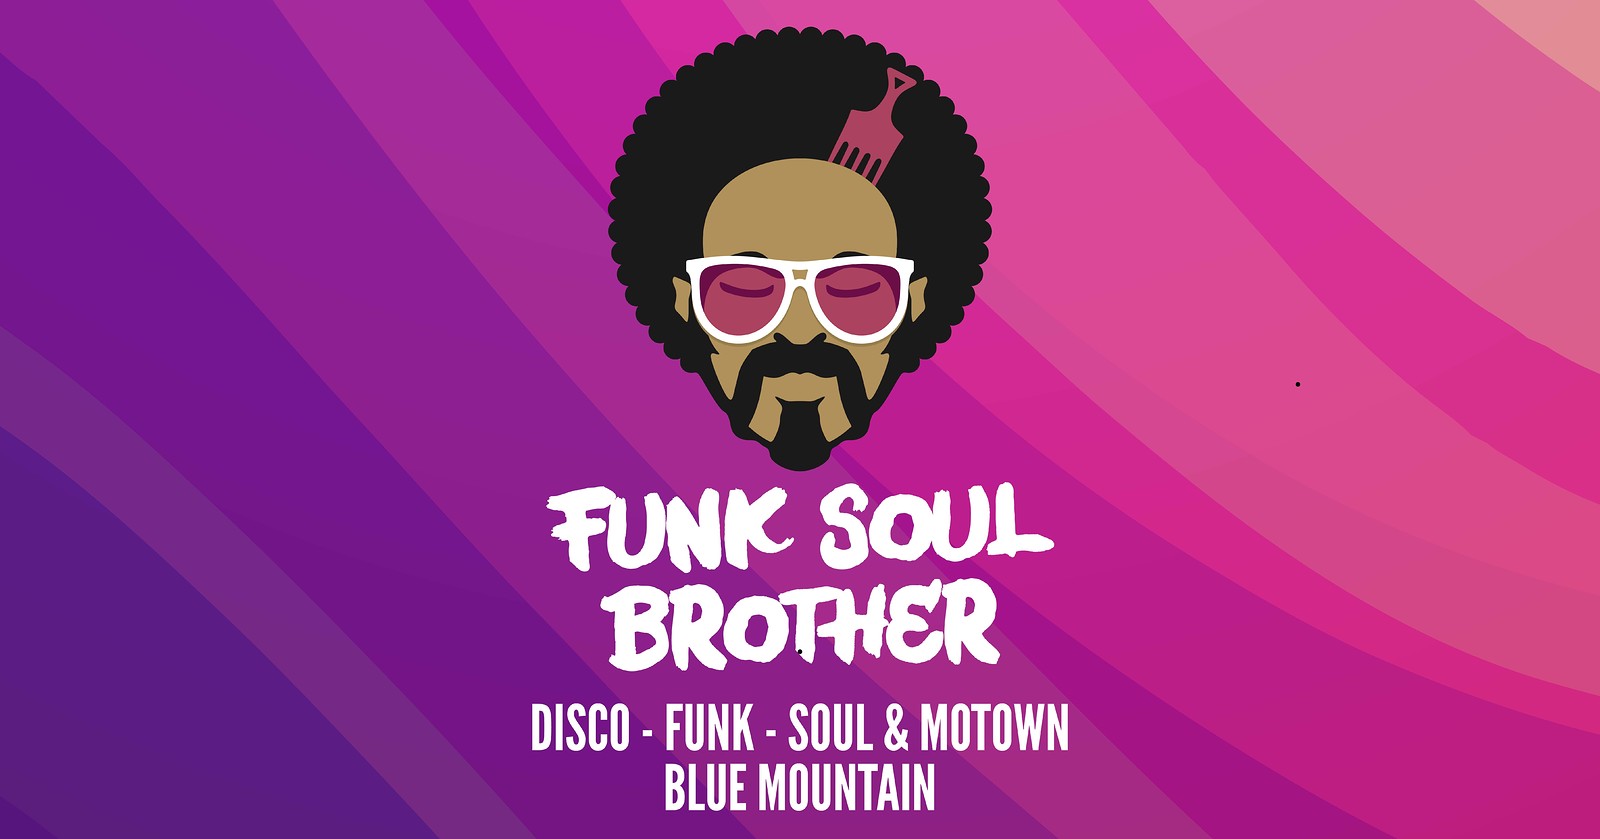 Funk Soul Brother: The £3 Dance at The Old Crown Courts